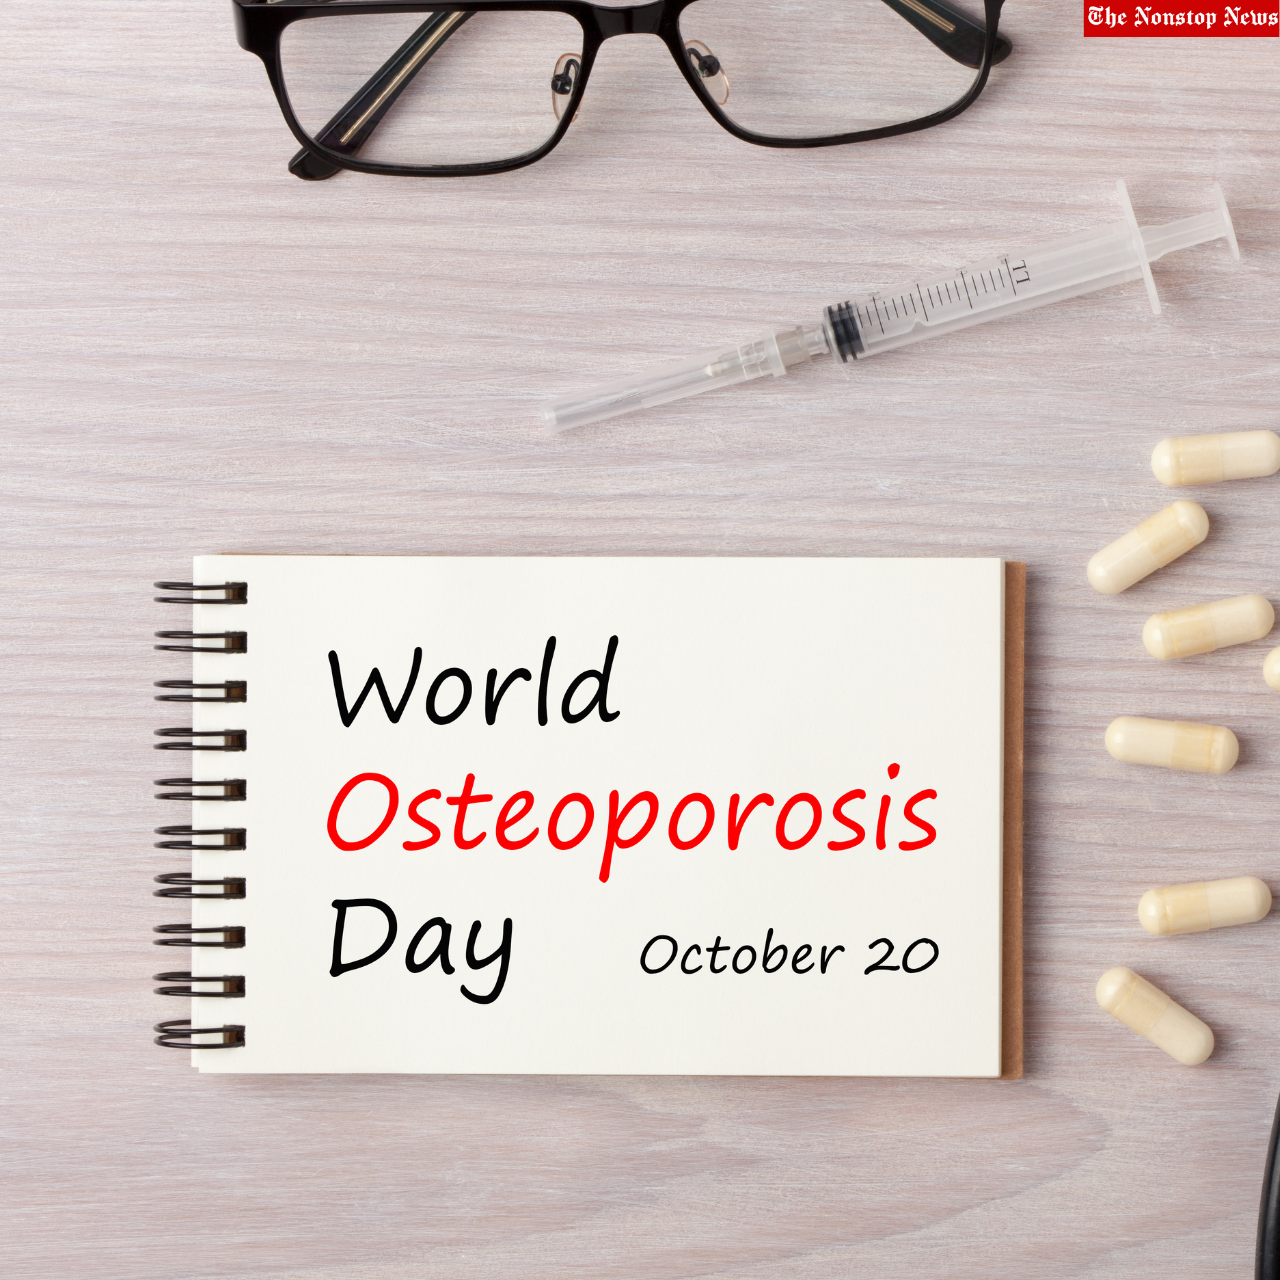 World Osteoporosis Day 2021 Quotes, HD Images, Poster, and Messages to create awareness